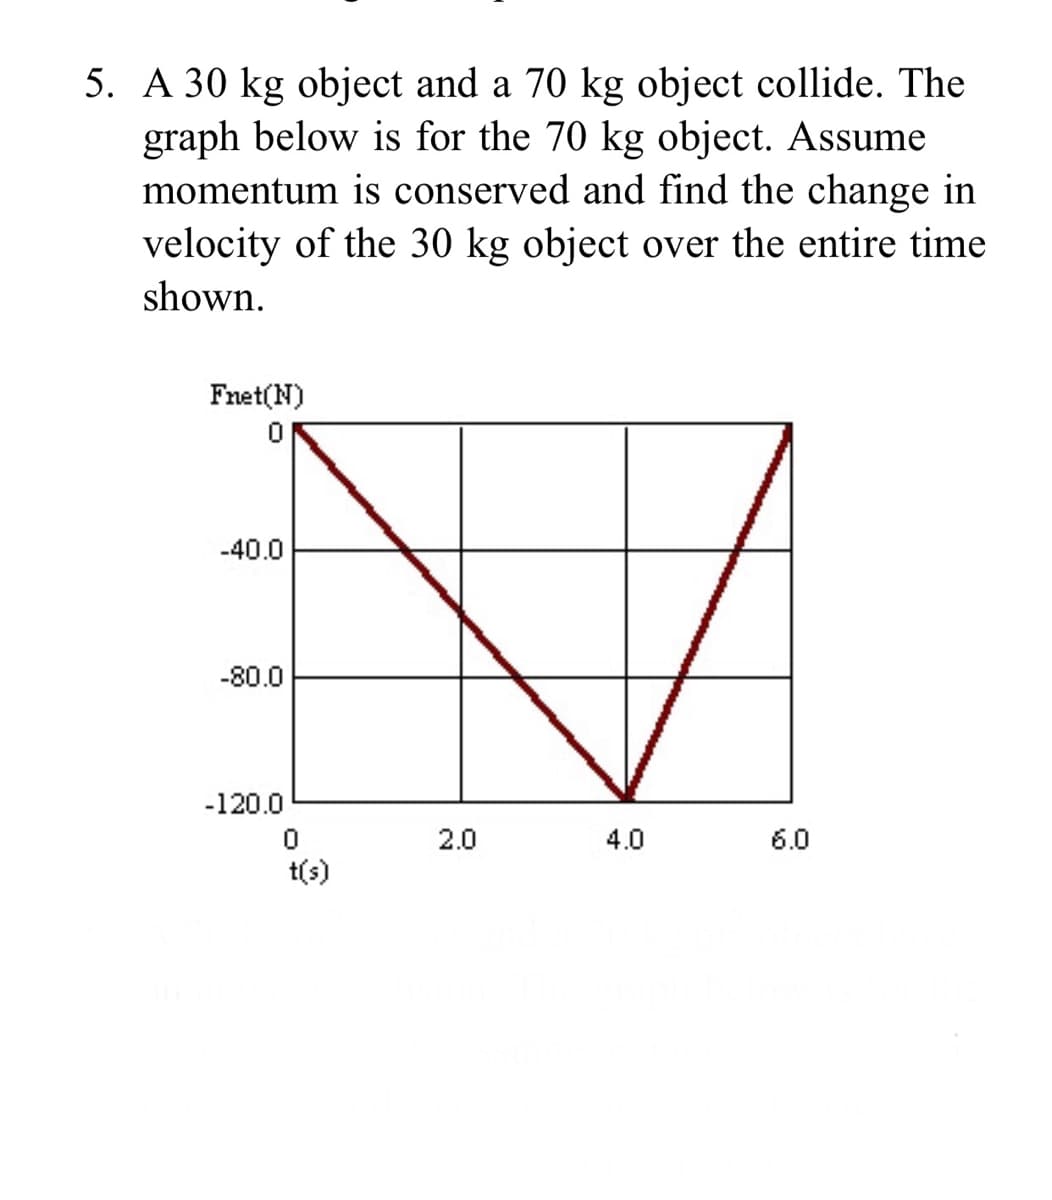 5. A 30 kg object and a 70 kg object collide. The
graph below is for the 70 kg object. Assume
momentum is conserved and find the change in
velocity of the 30 kg object over the entire time
shown.
Fnet(N)
-40.0
-80.0
-120.0
2.0
4.0
6.0
t(s)
